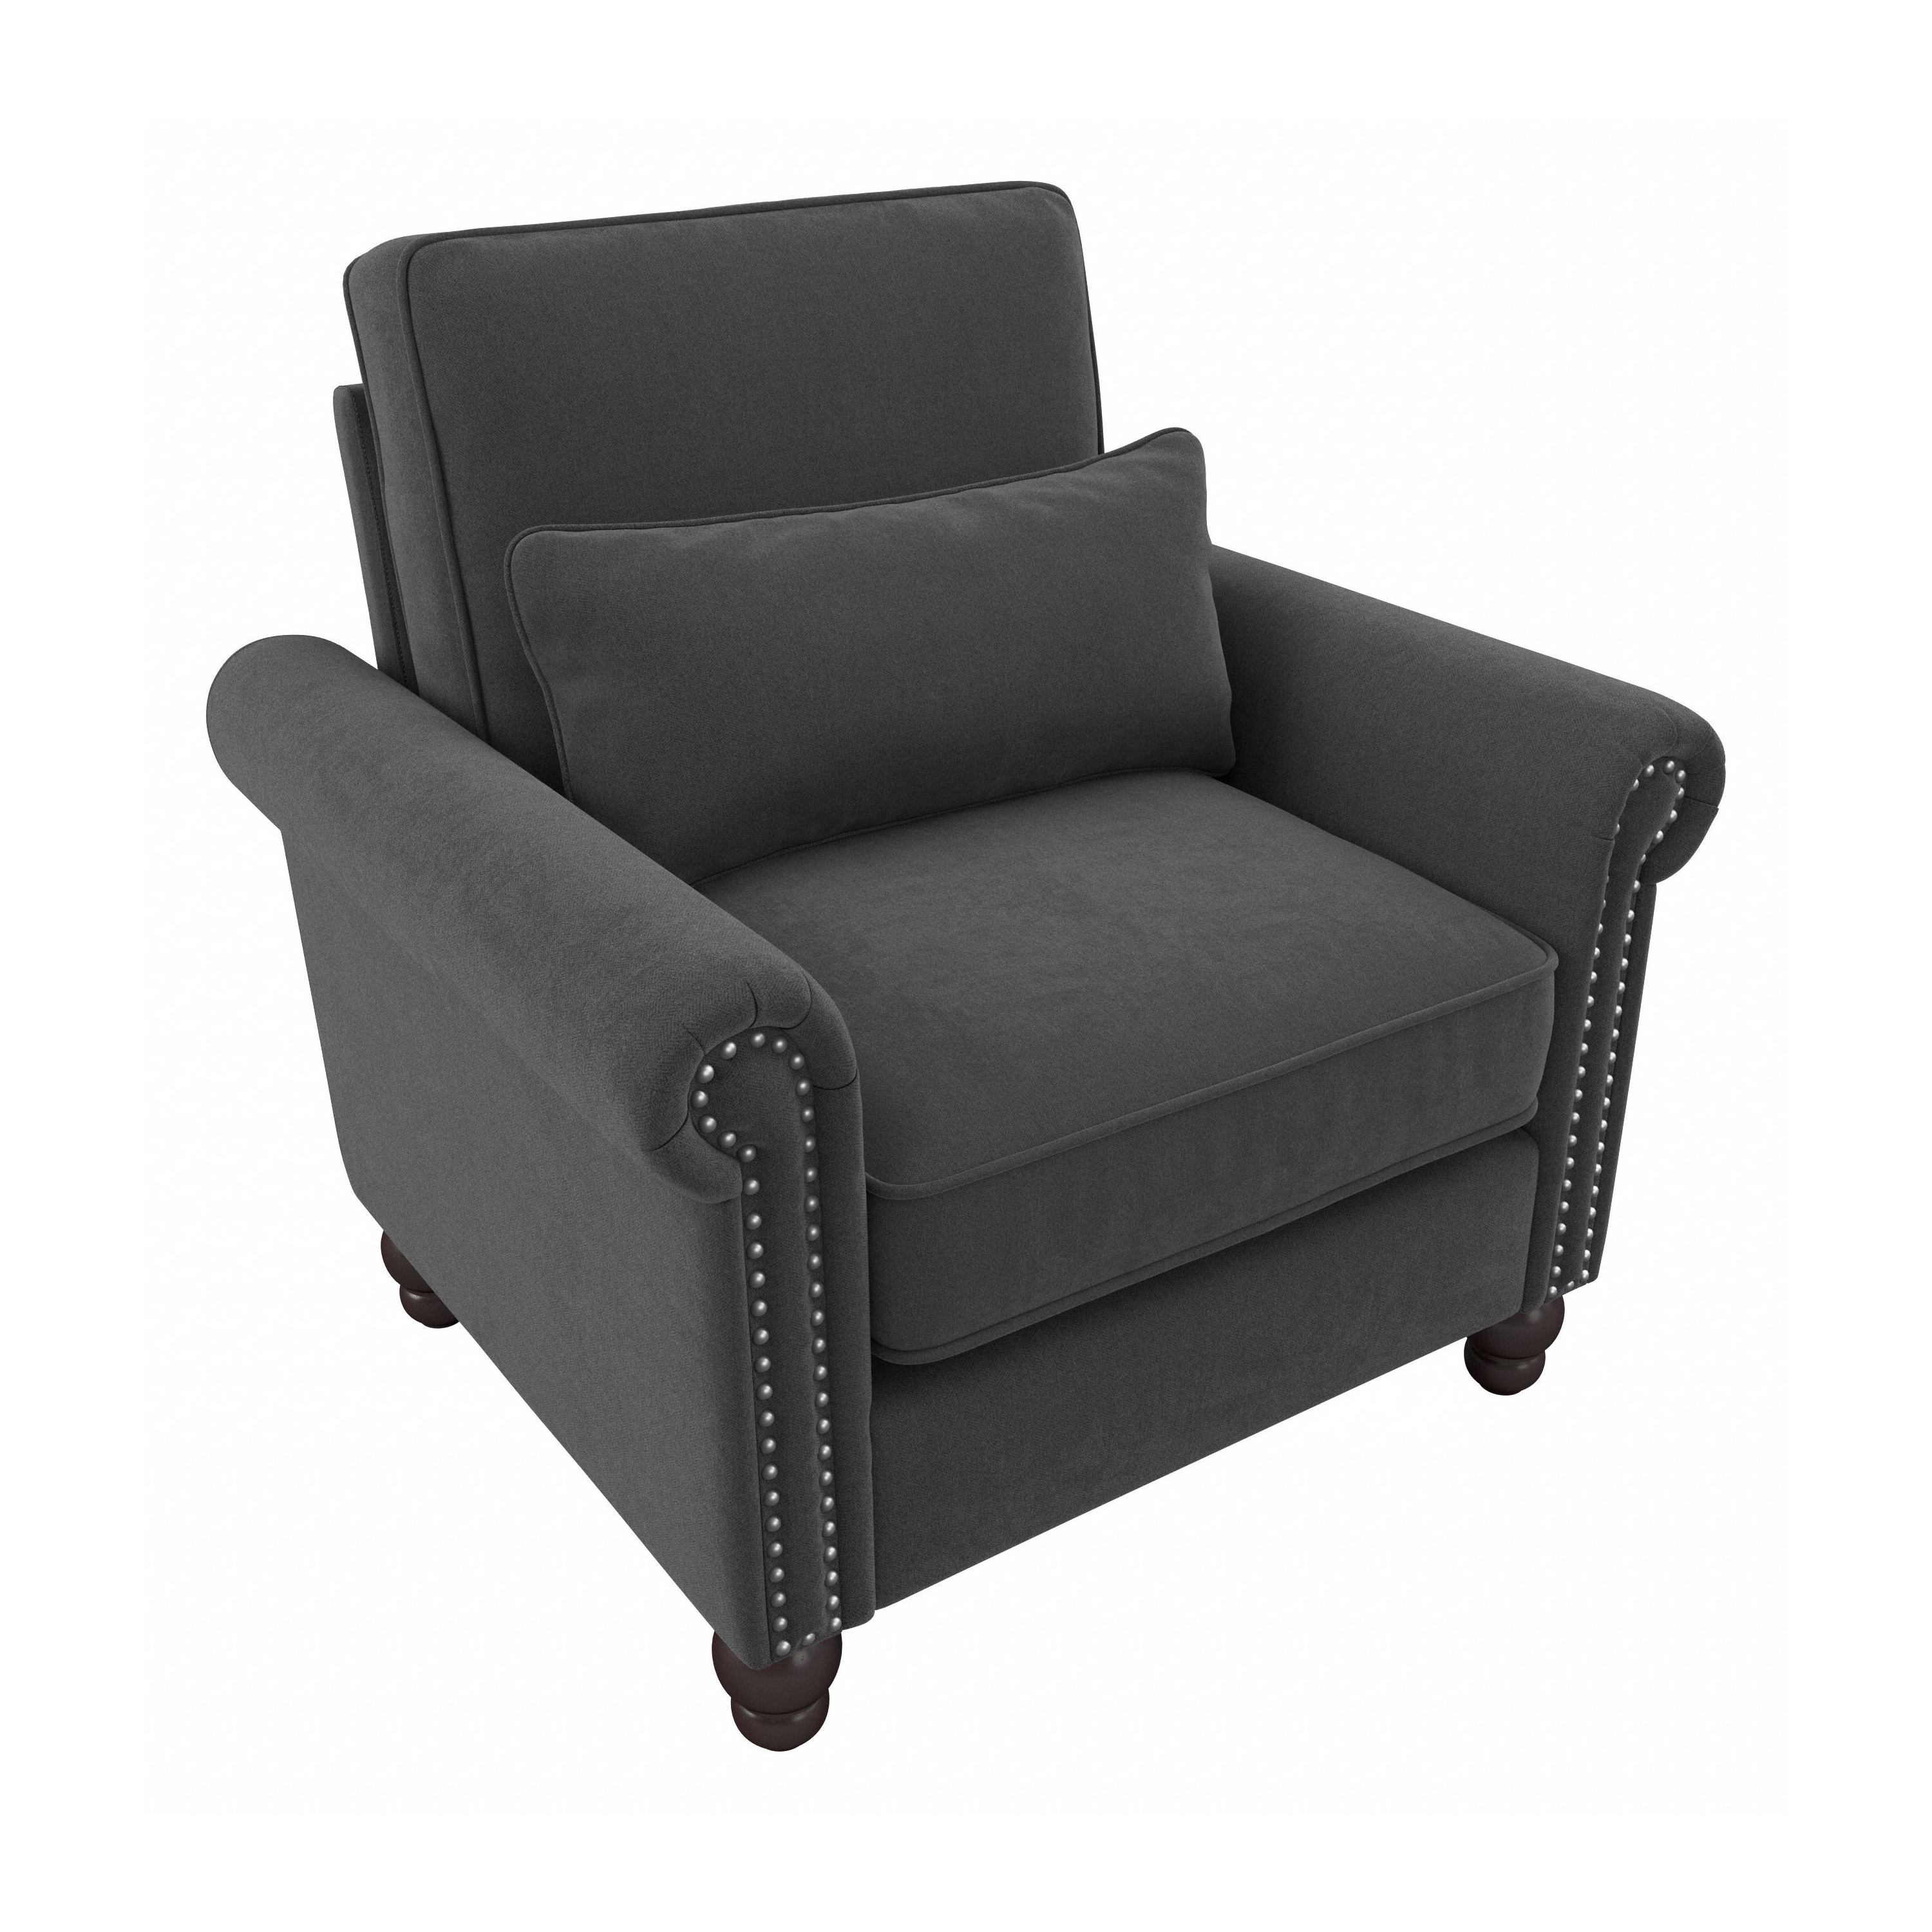 Shop Bush Furniture Coventry Accent Chair with Arms 02 CVK36BCGH-03 #color_charcoal gray herringbone fabr